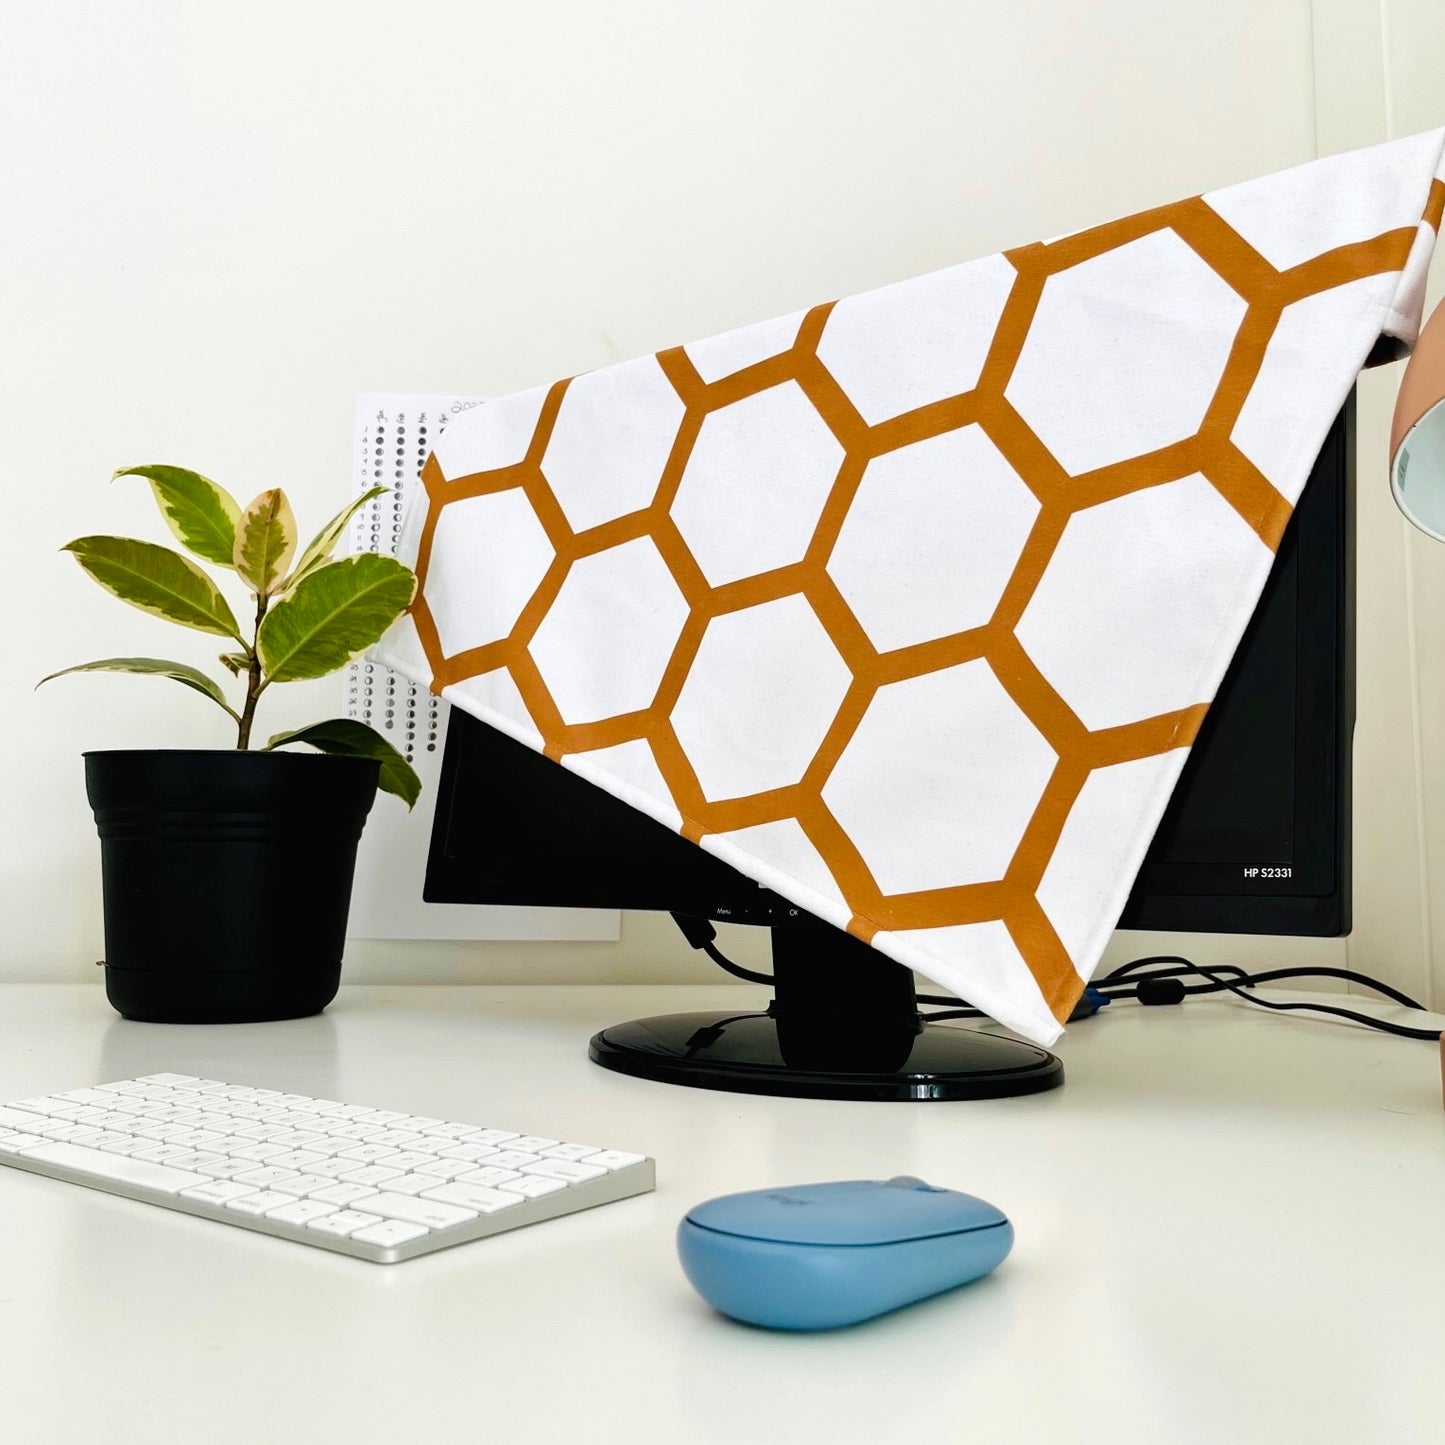 gold hexagon monitor protector on a home office computer